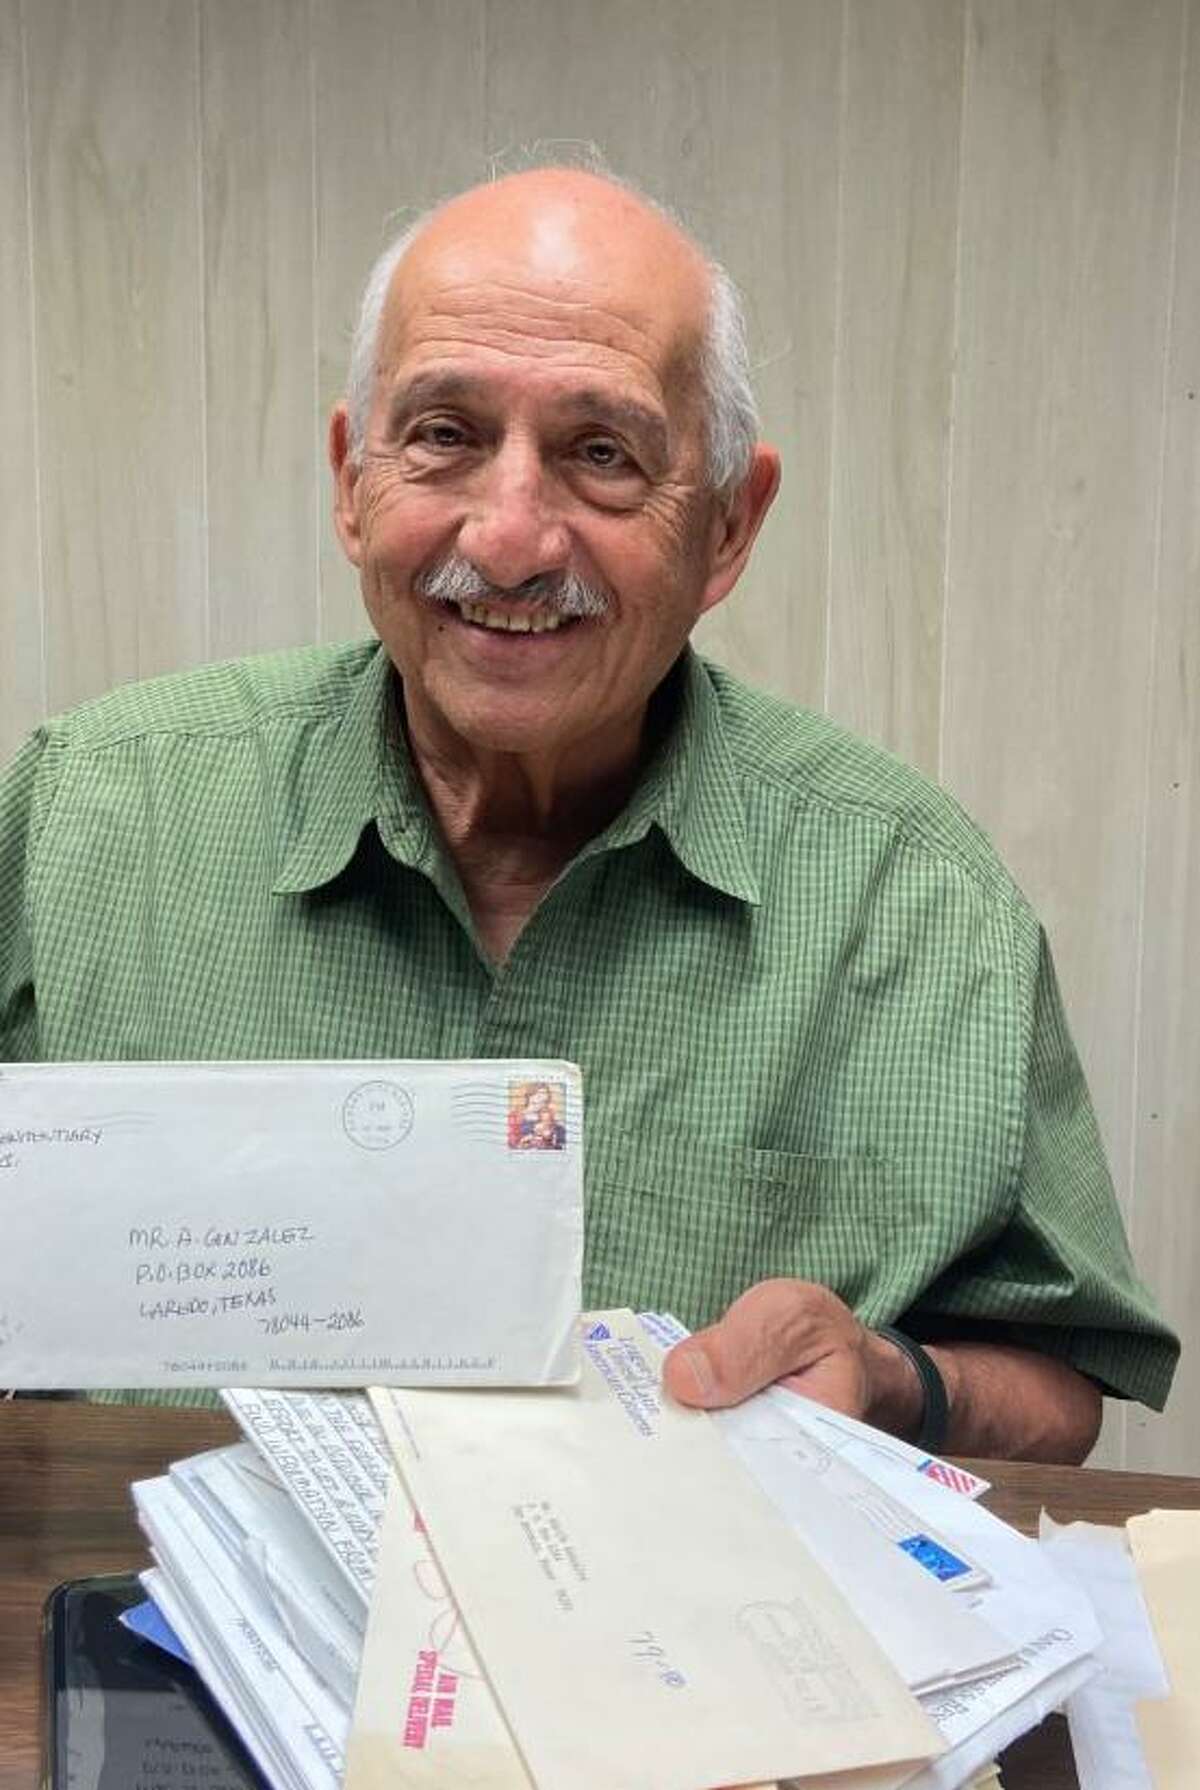 Adolfo L. Gonzalez holds one of his letters from Ramiro “Ramsey” Muniz, a gubernatorial candidate in 1972.